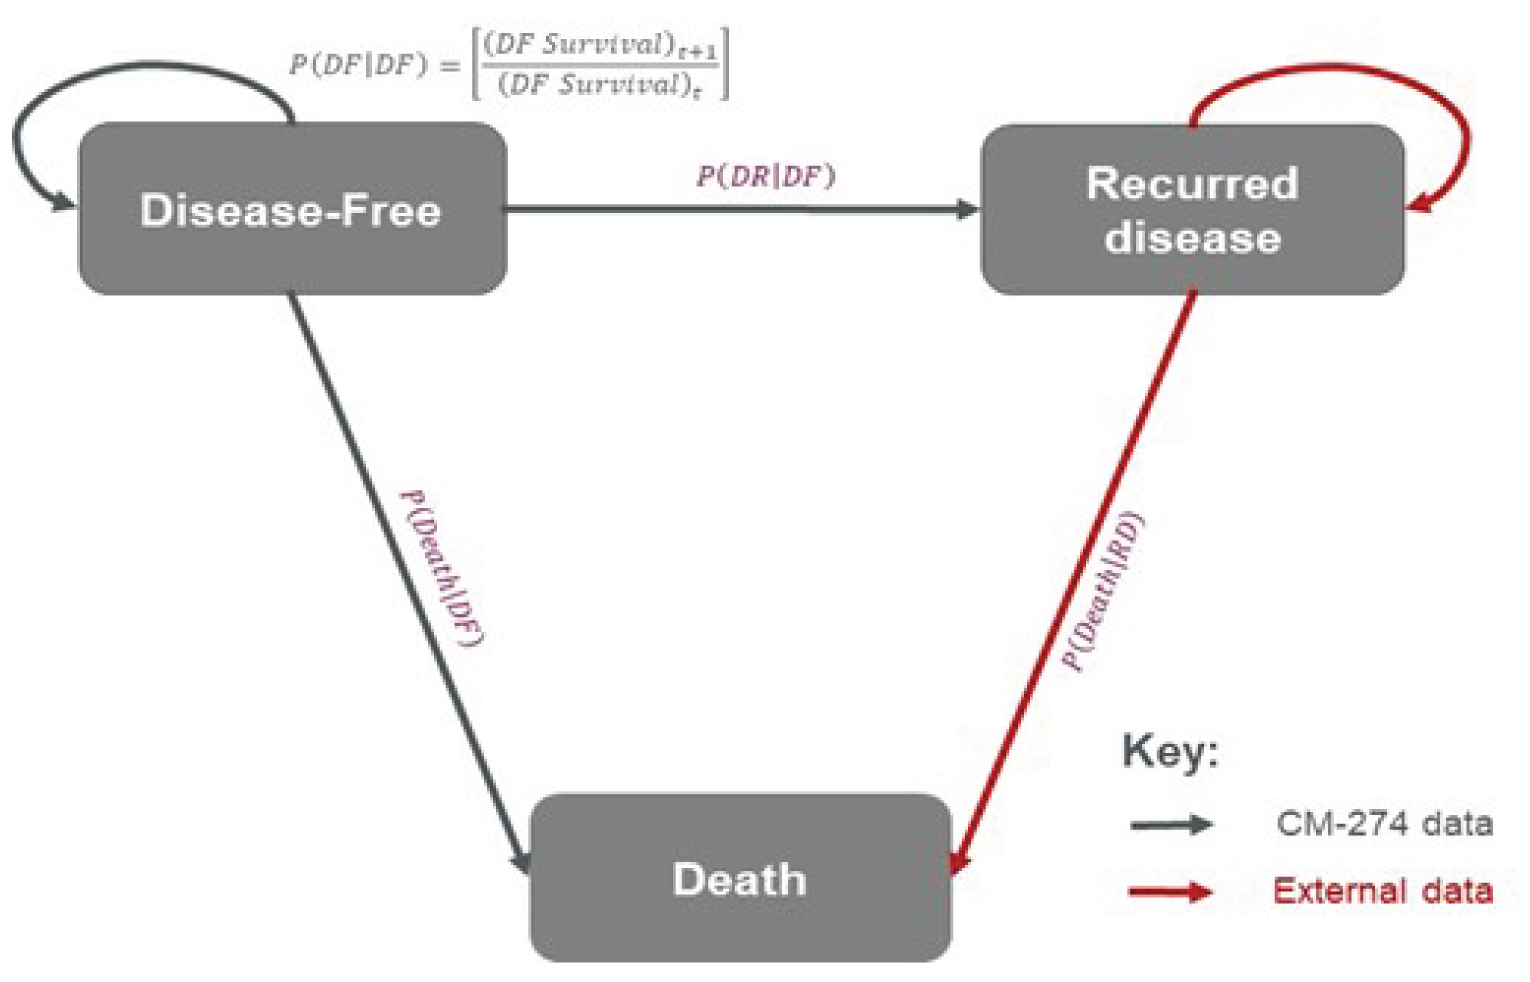 The figure depicts the sponsor’s 3-state partitioned survival model. Patients can remain in the disease-free state, or transition to the recurred disease or death states. Each cycle, patients can remain in the recurred disease state or progress to death. The figure also notes that data from CheckMate 274 informs the probability of patients remaining disease-free or moving to recurred disease or death, while the probability for patients with recurred disease to remain in that state or transition to death is informed by other data.